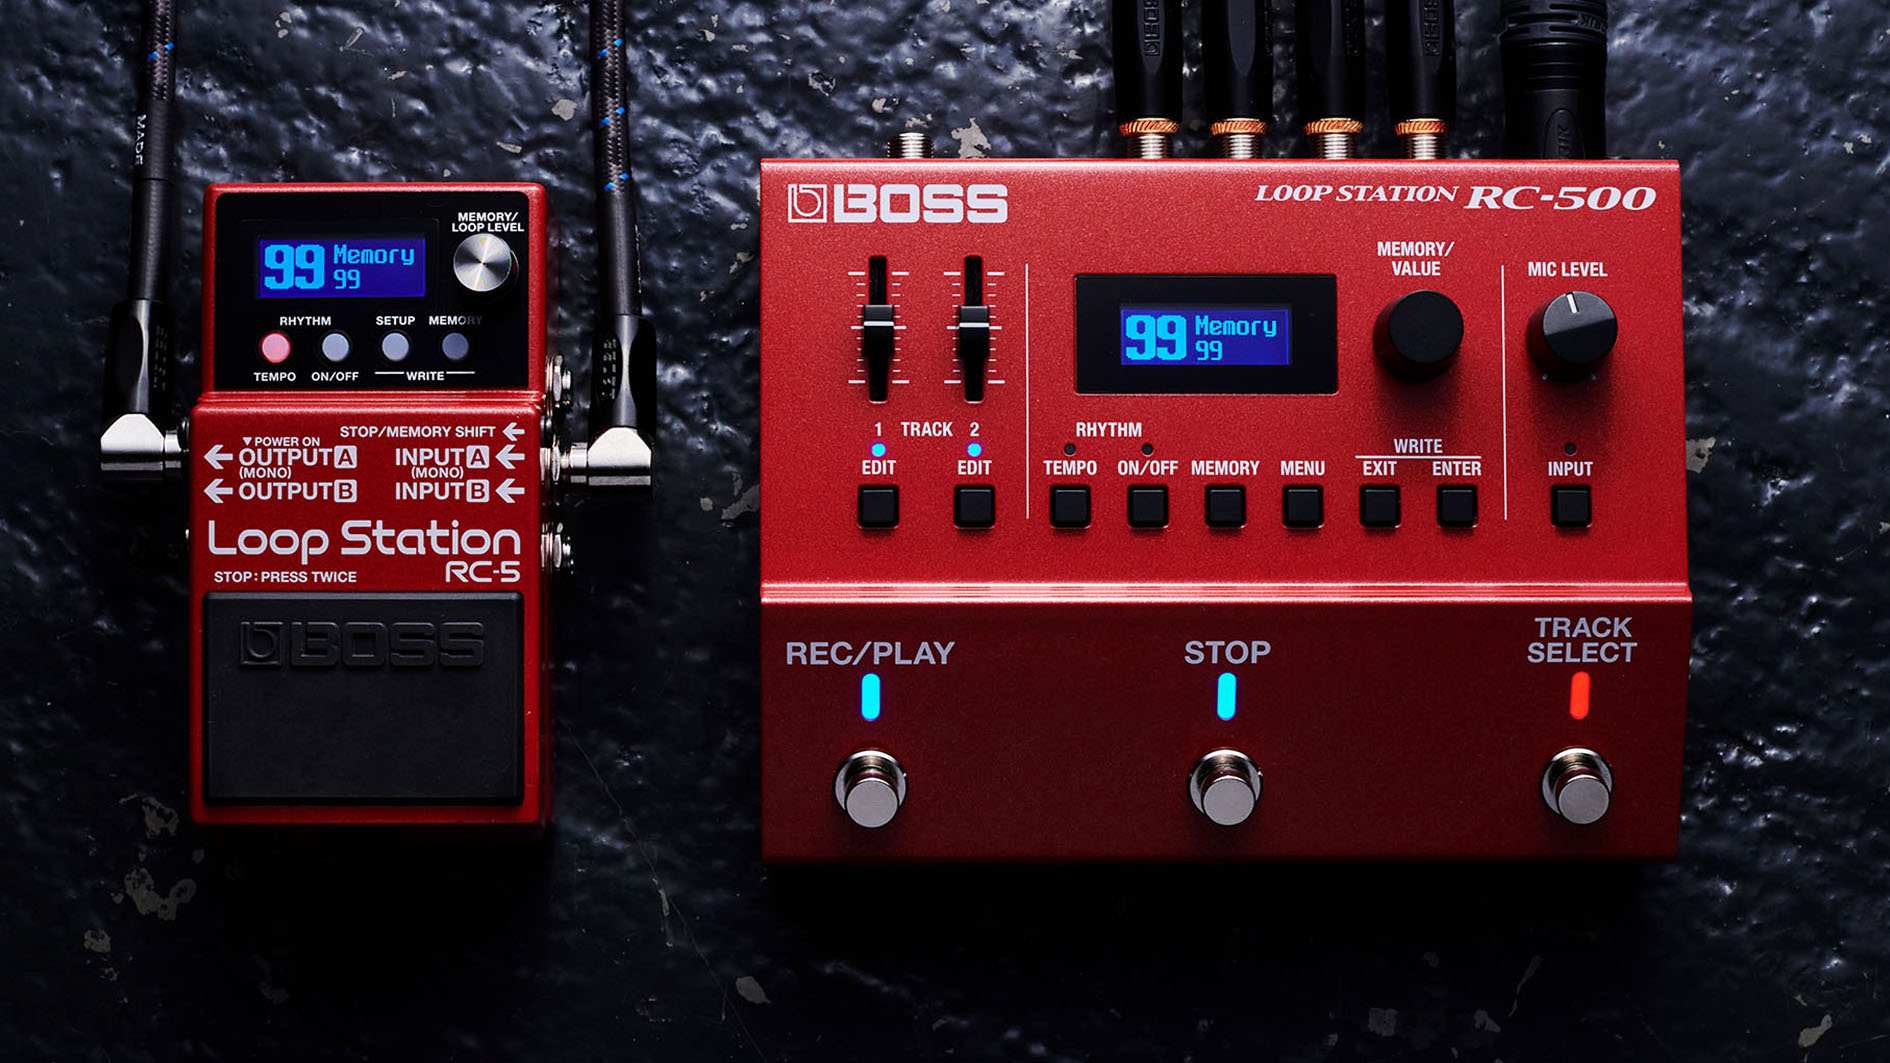 Boss expands its Loop Station family with new RC-5 and RC-500